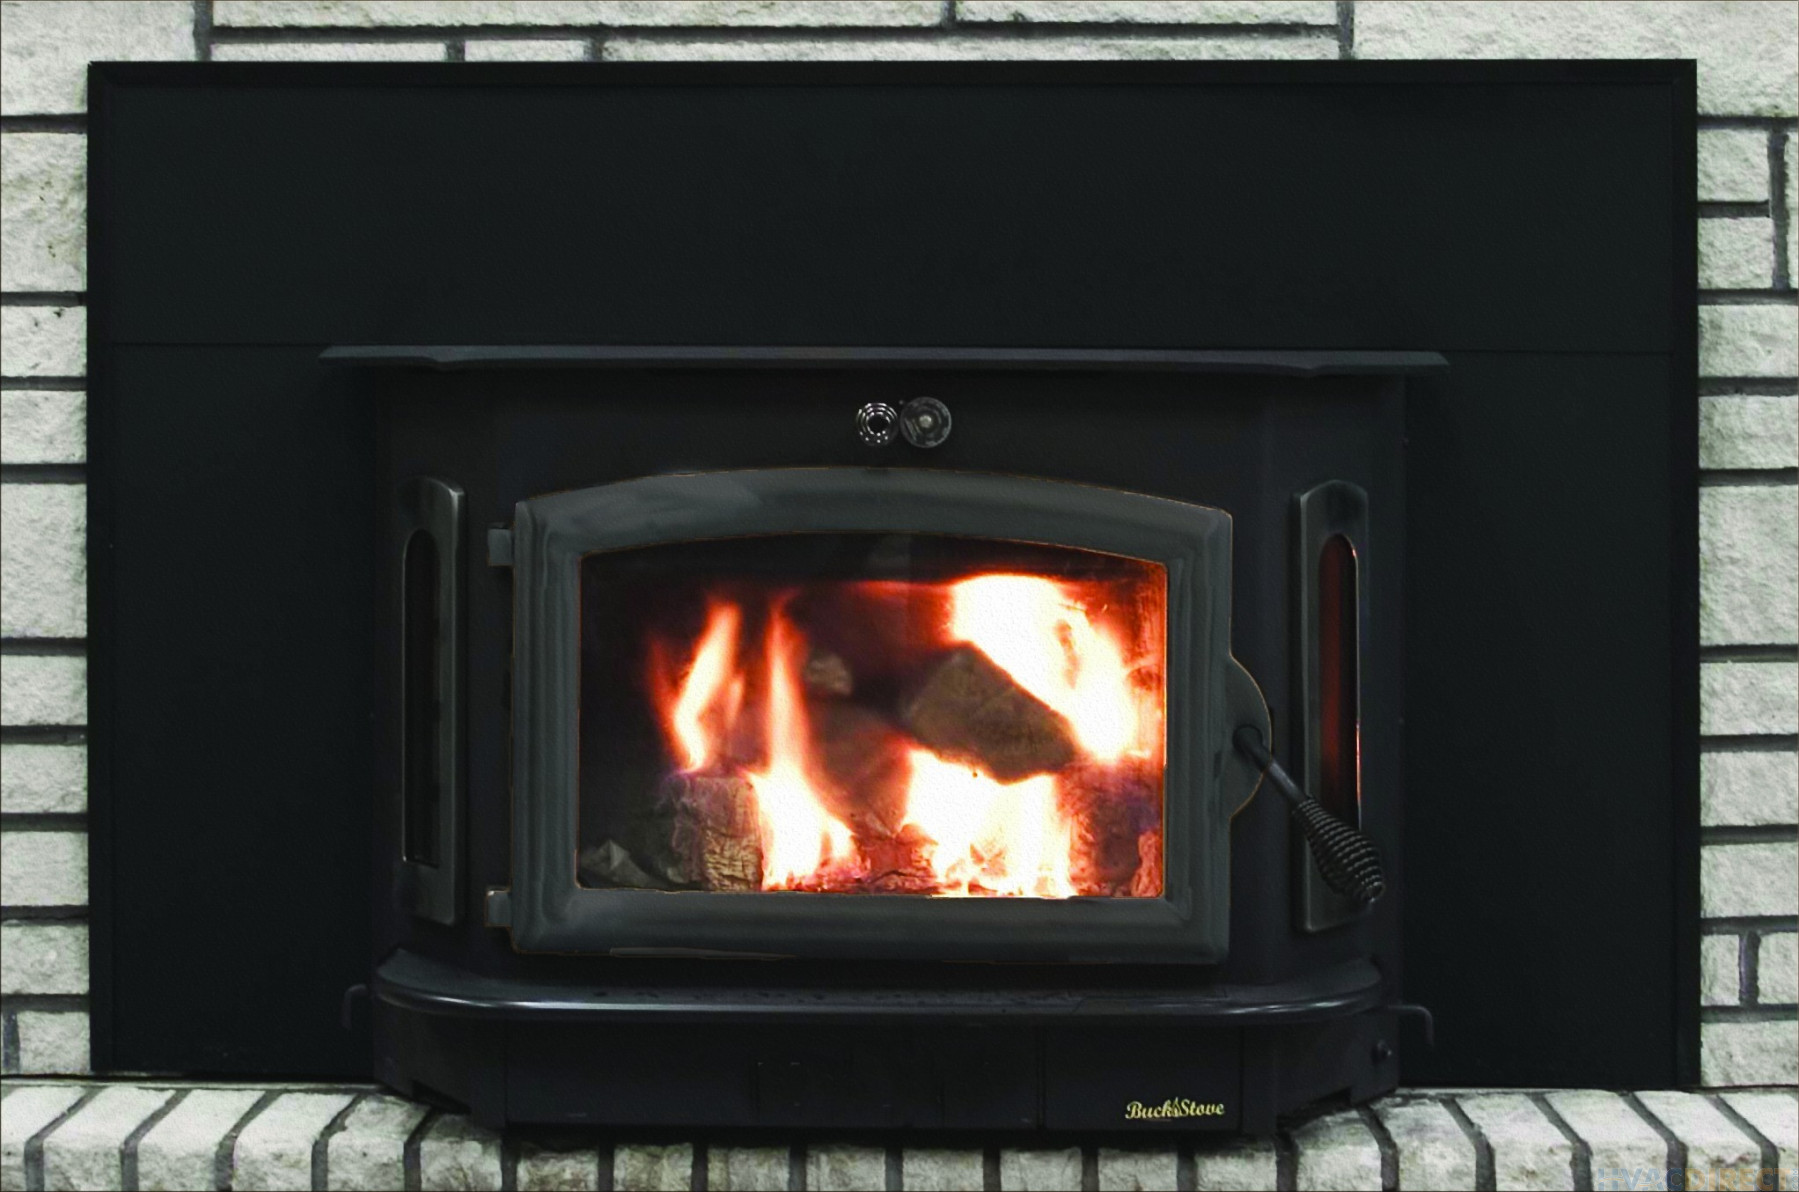 Buck Stove Model 91 Wood Stove Or Insert With Blower